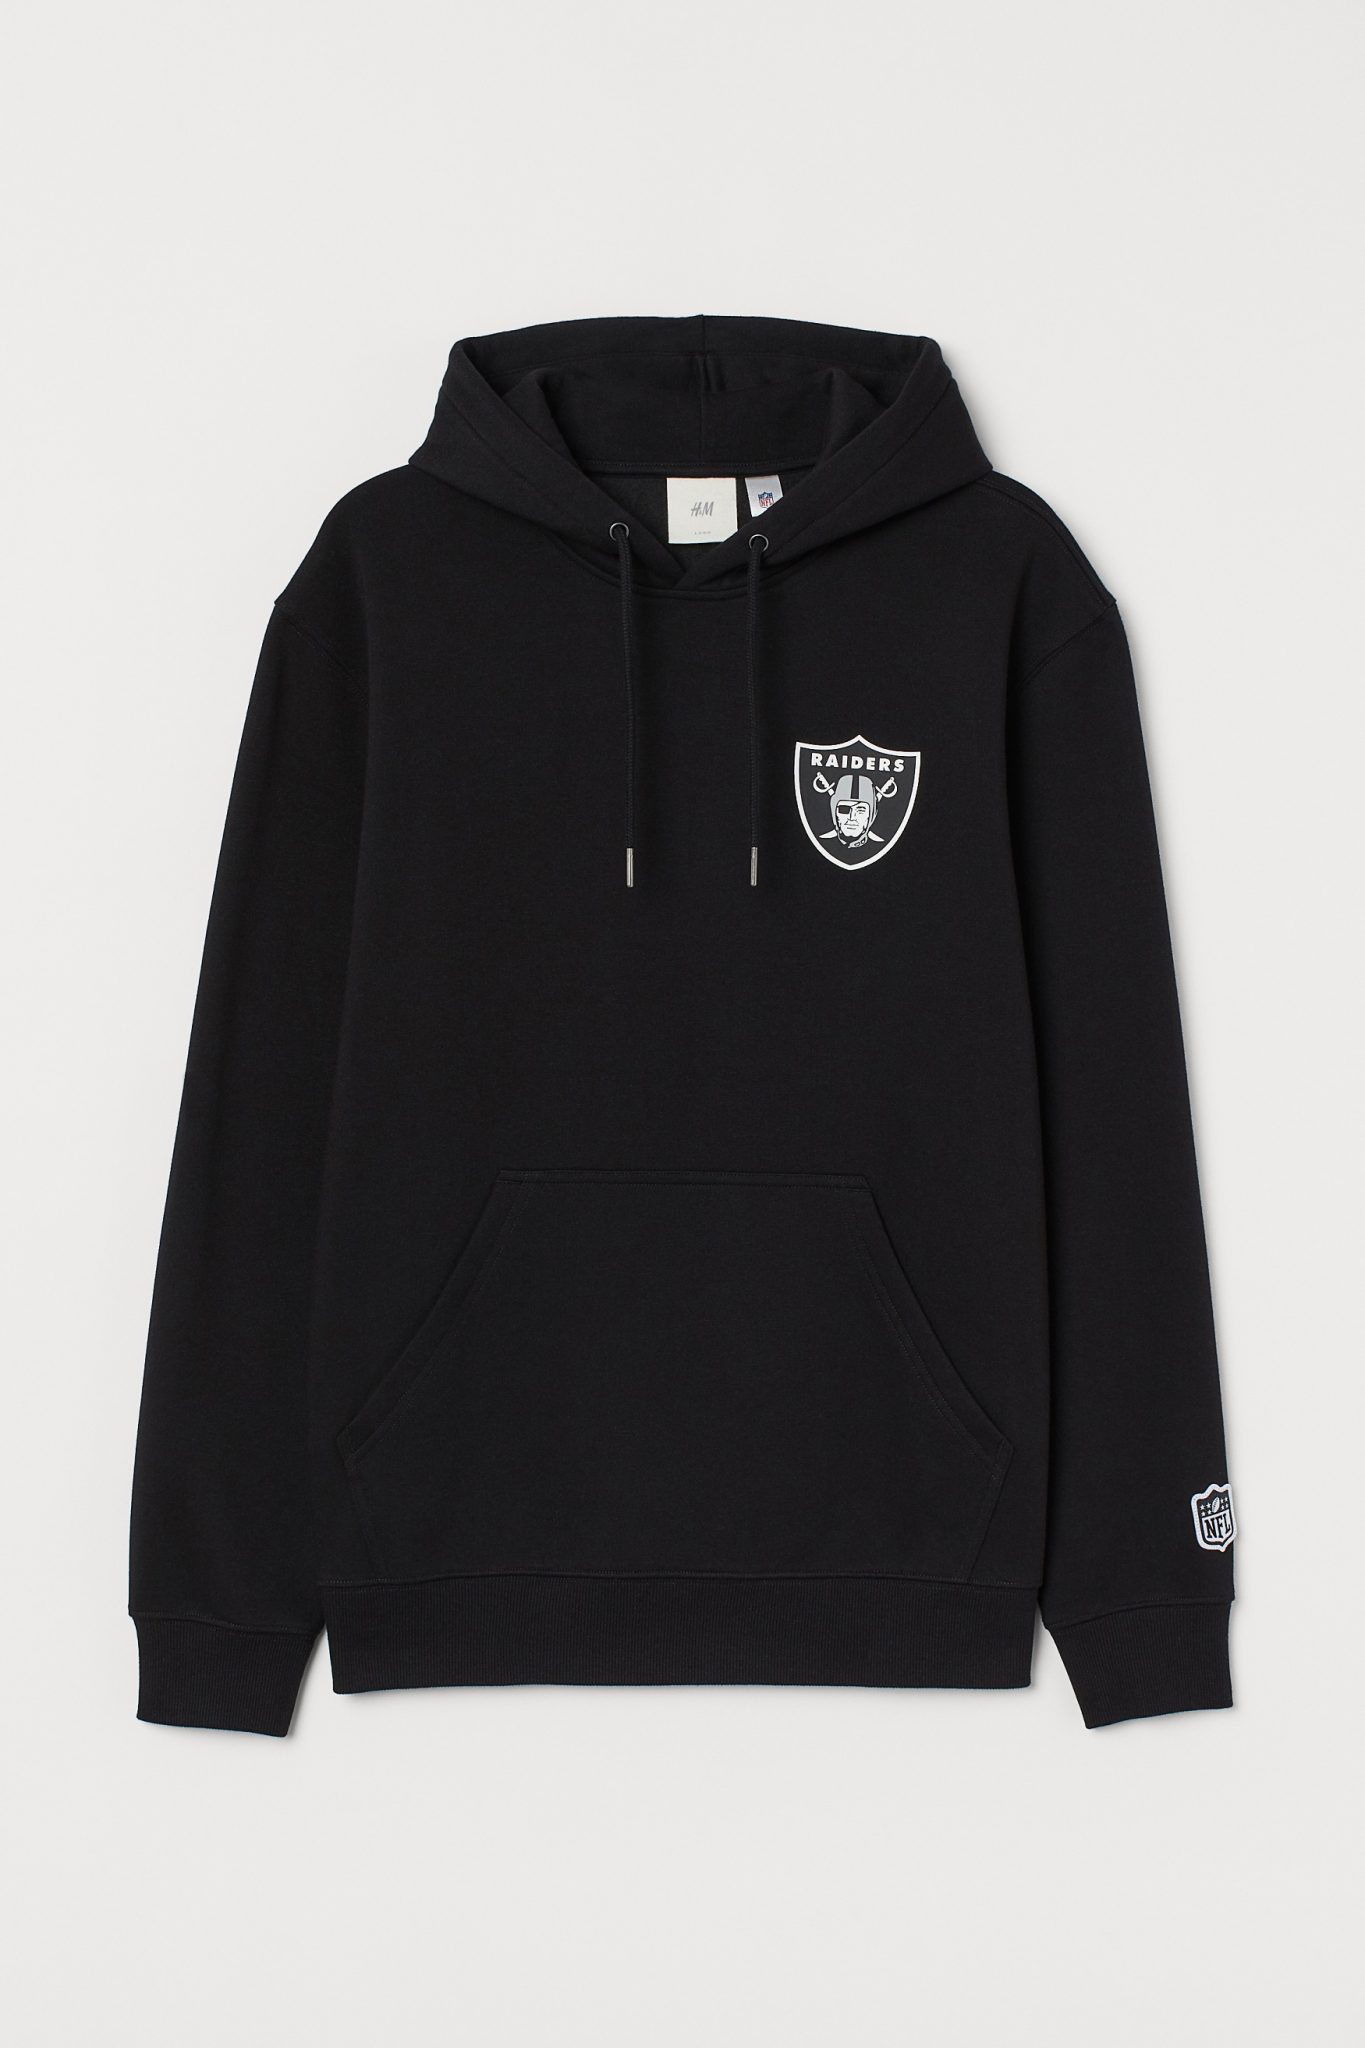 H&M Launches NFL Apparel Collection image